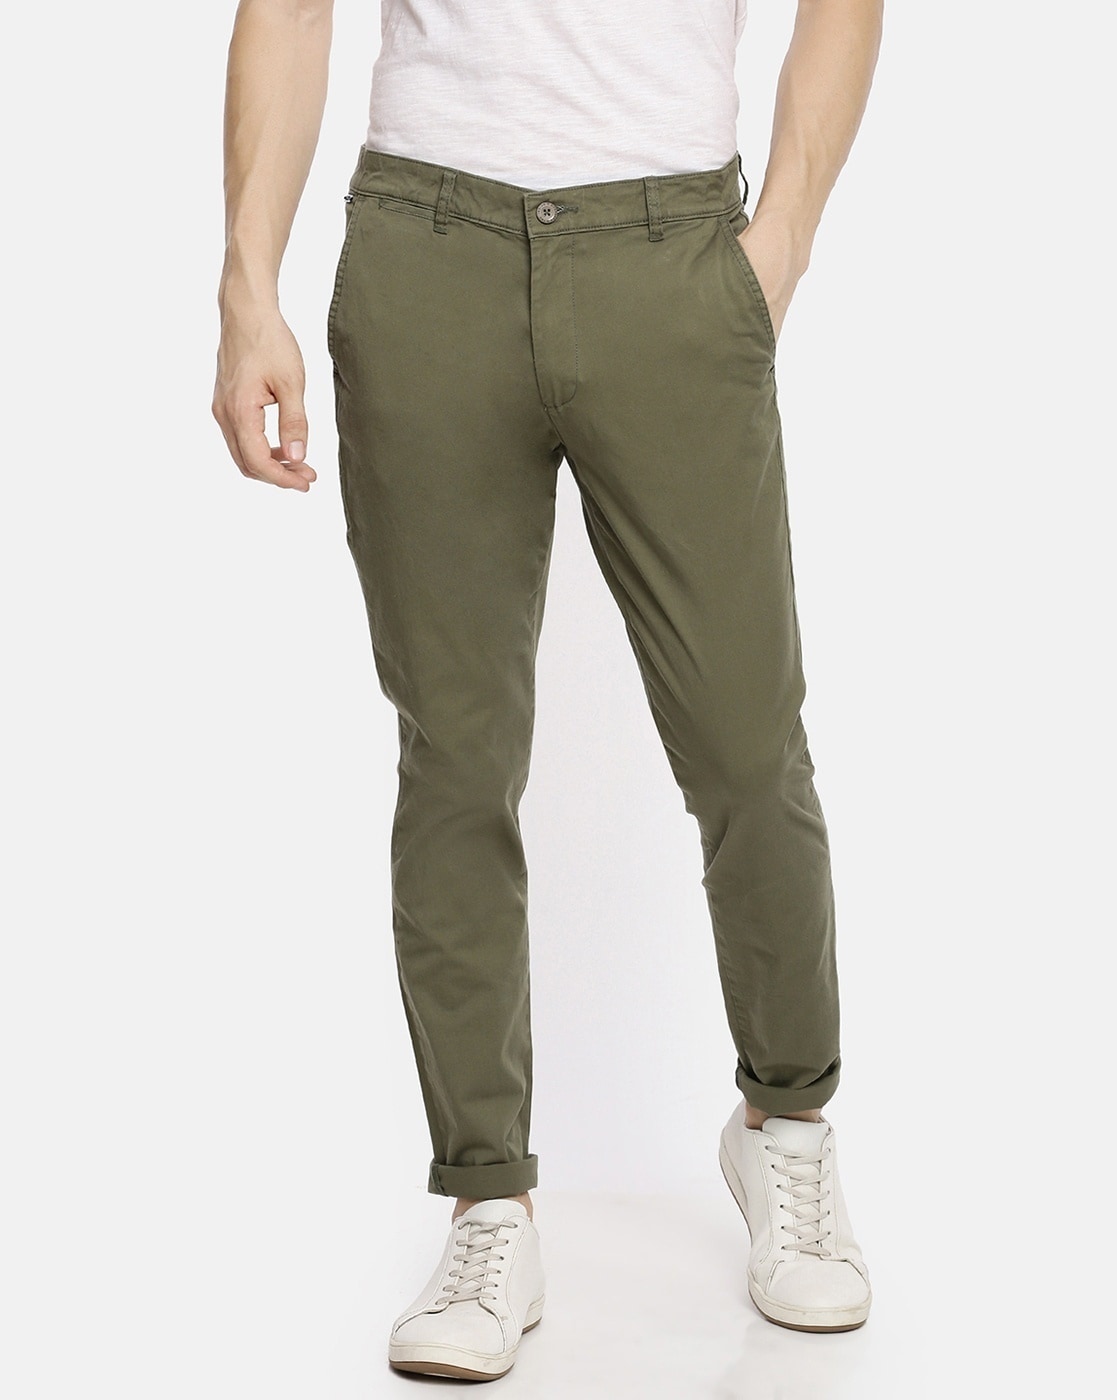 Buy LABROZ Mens Tapered Fit Cotton Chino Pants DGNLPISTA28Pista  Green28 at Amazonin